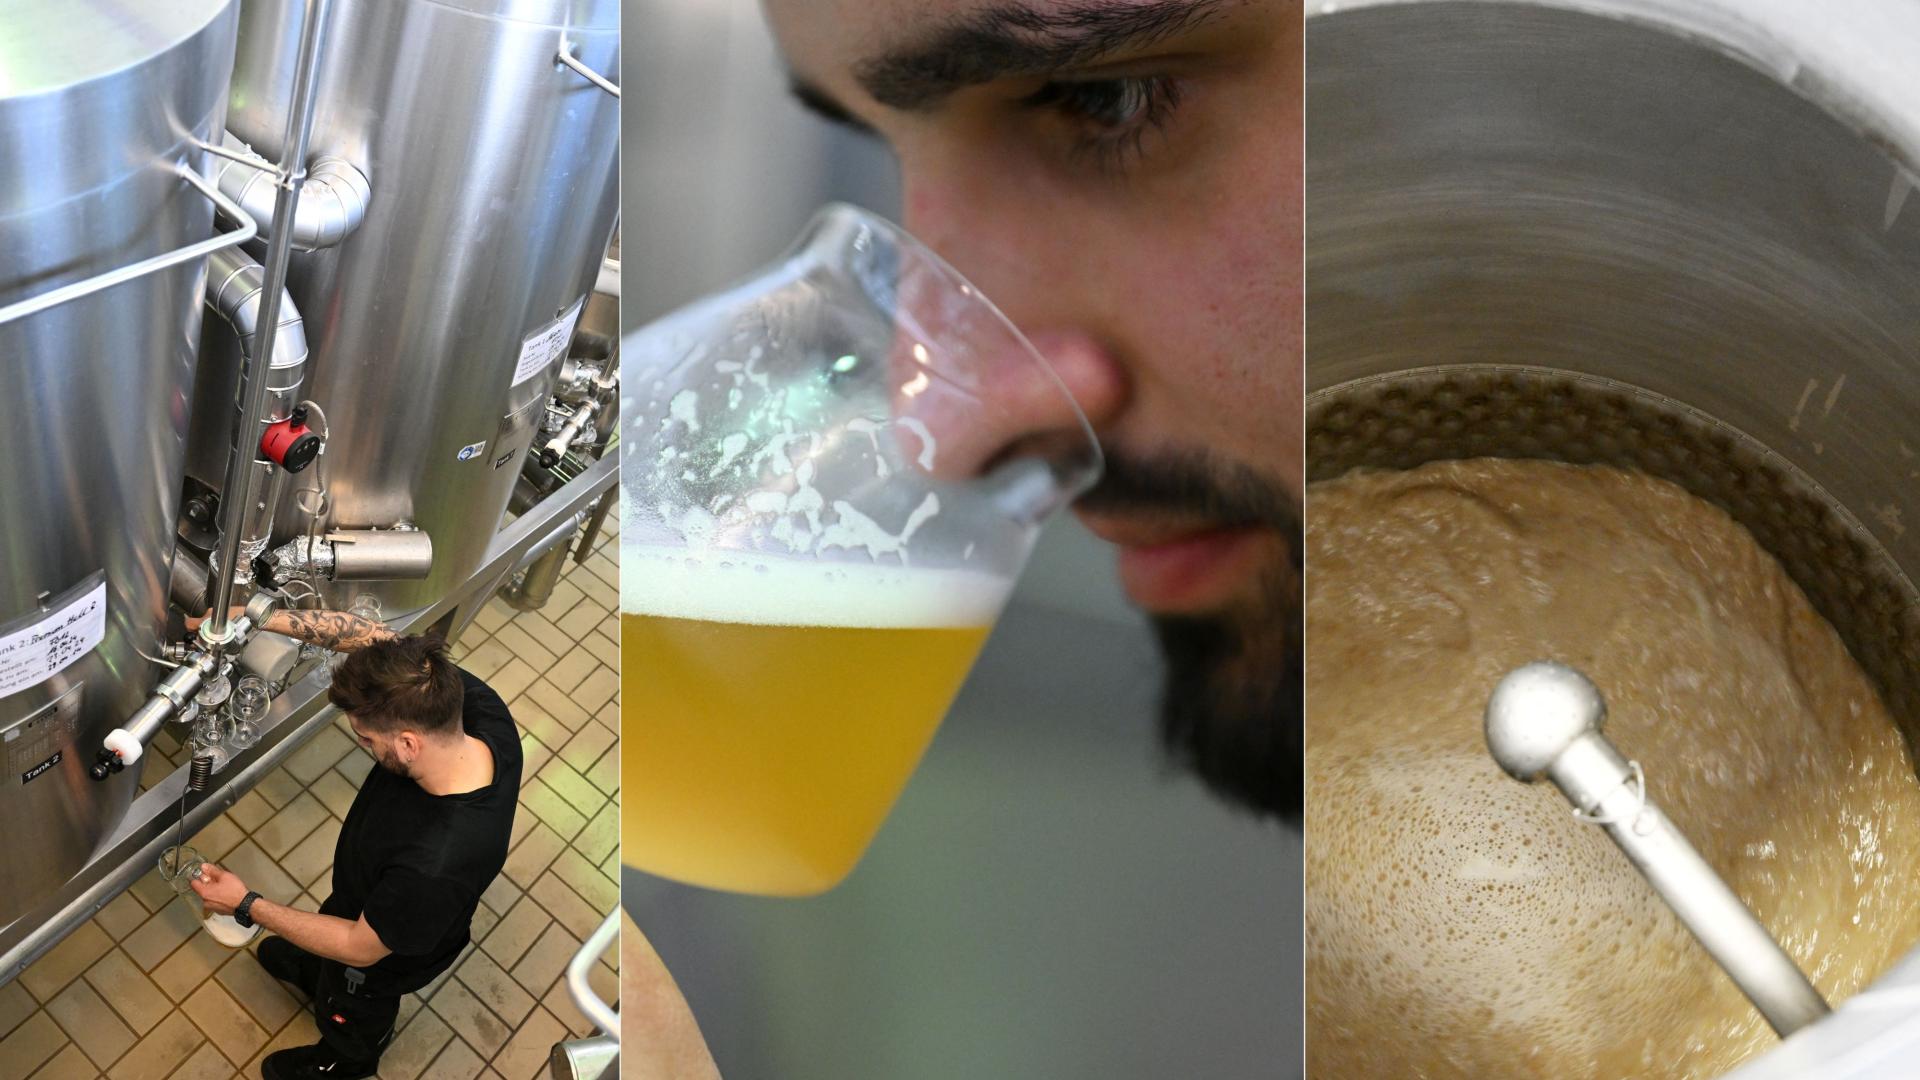 Sewage beer – ‘delicious’ and could help us deal with water shortages [Video]